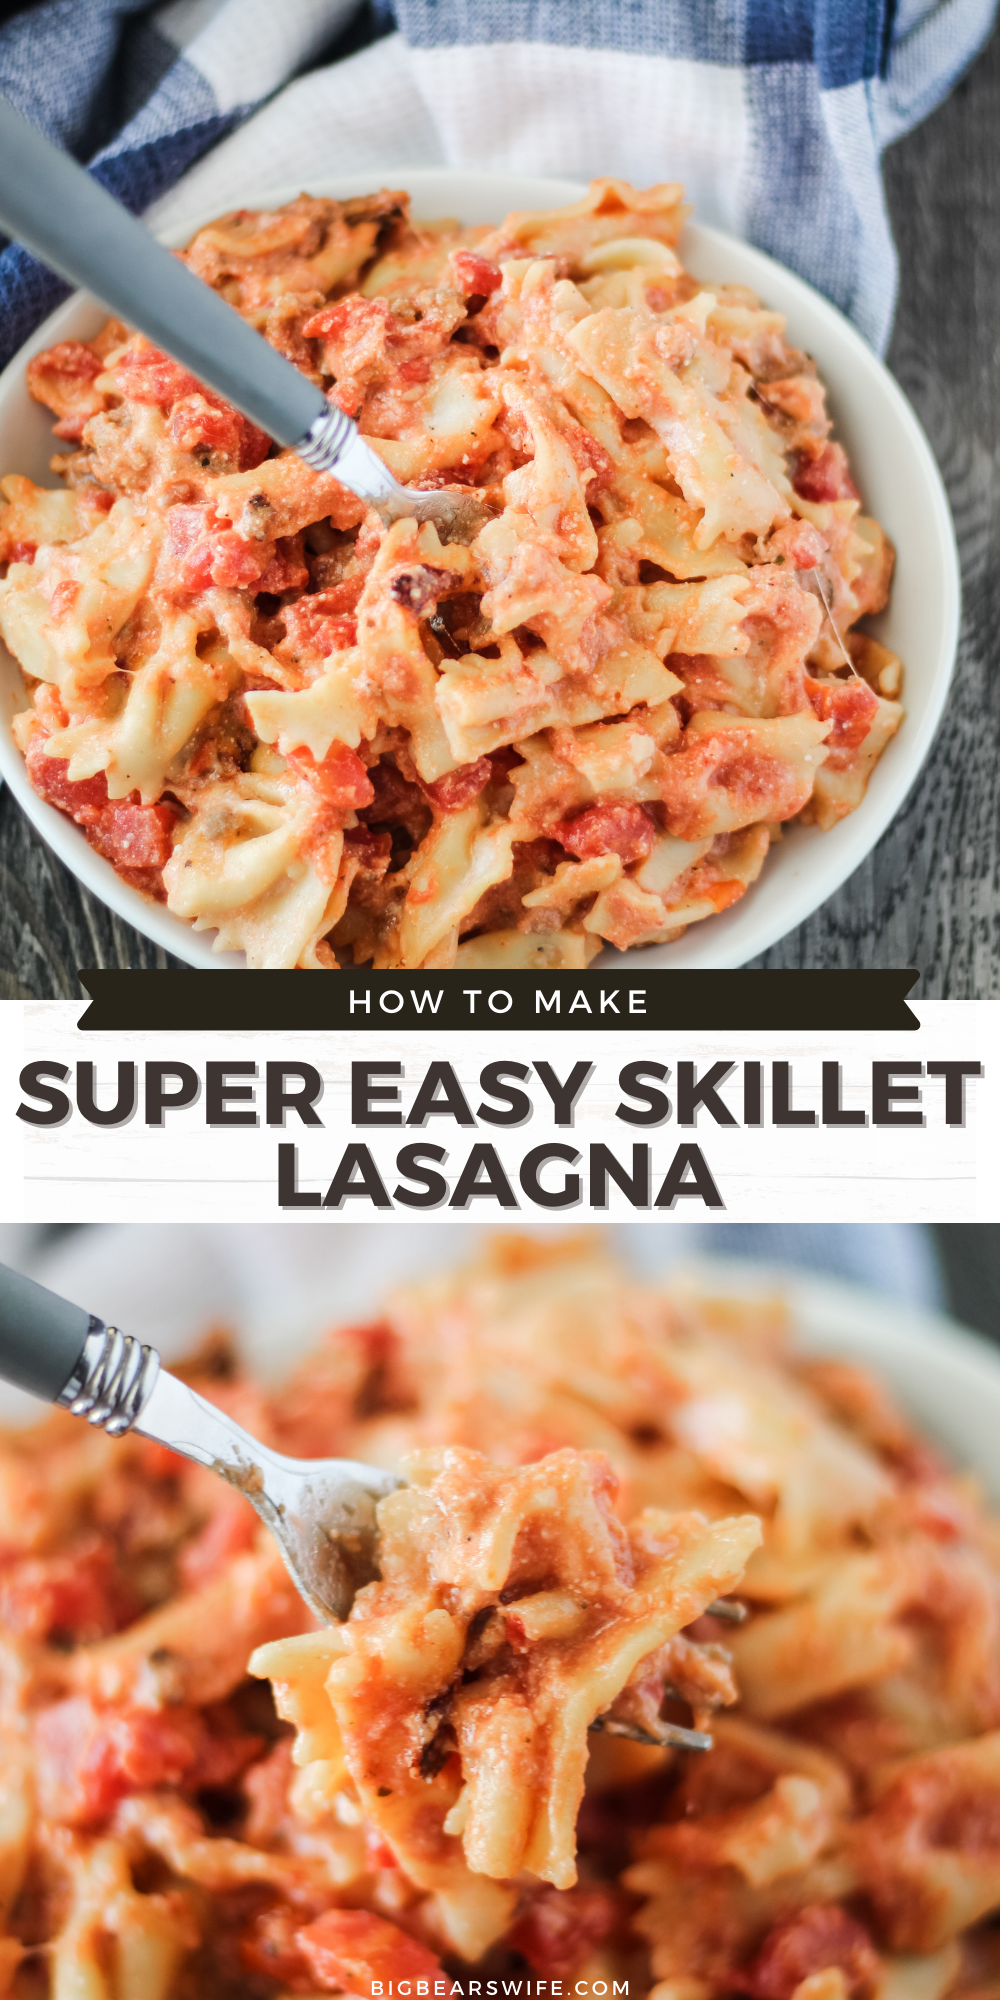 This Super Easy Skillet Lasagna will be a new family favorite and it only takes 30 minutes to make.  via @bigbearswife